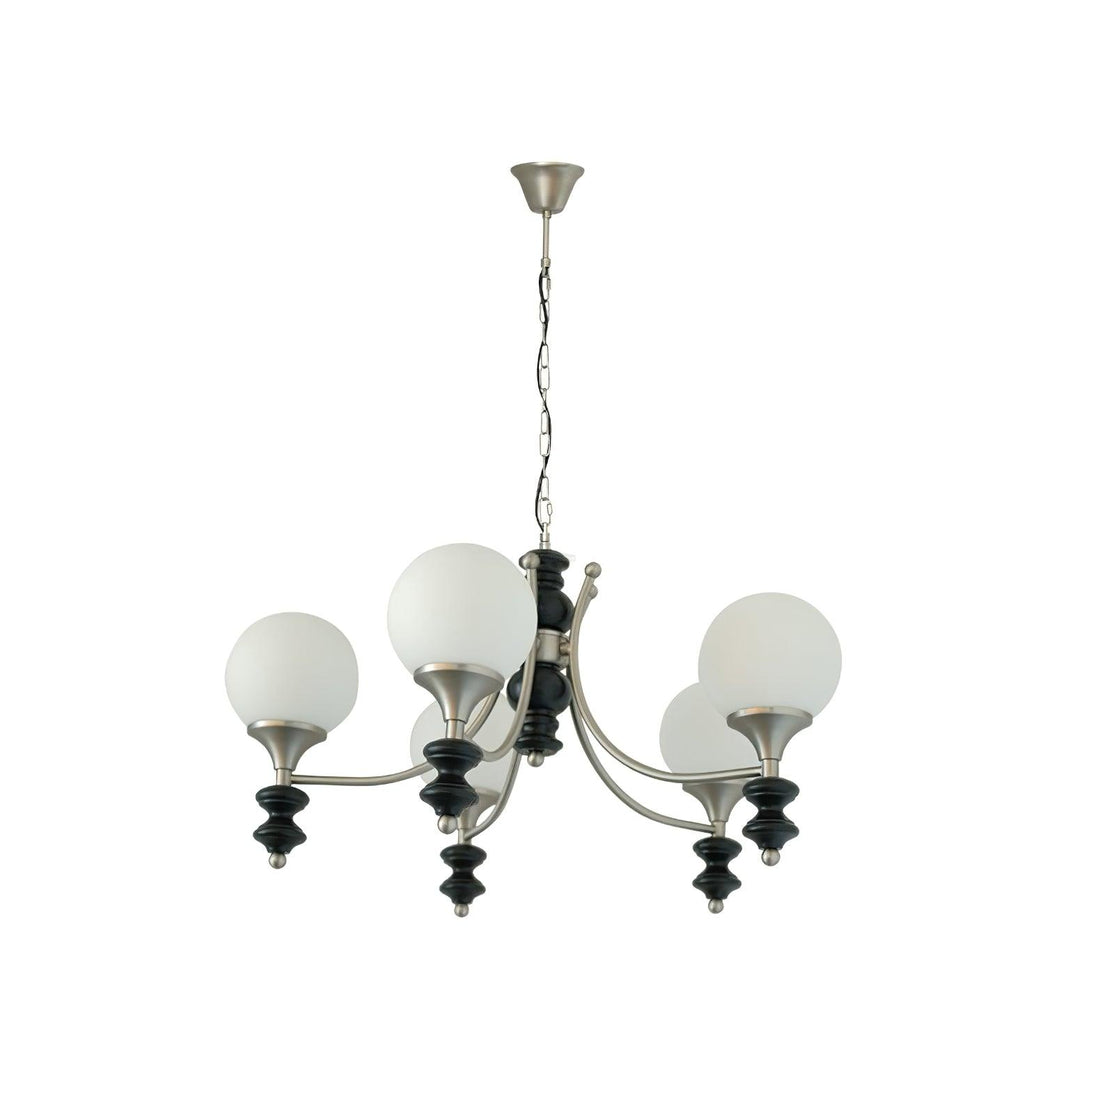 Tina Wooden Chandelier with 3/5 heads